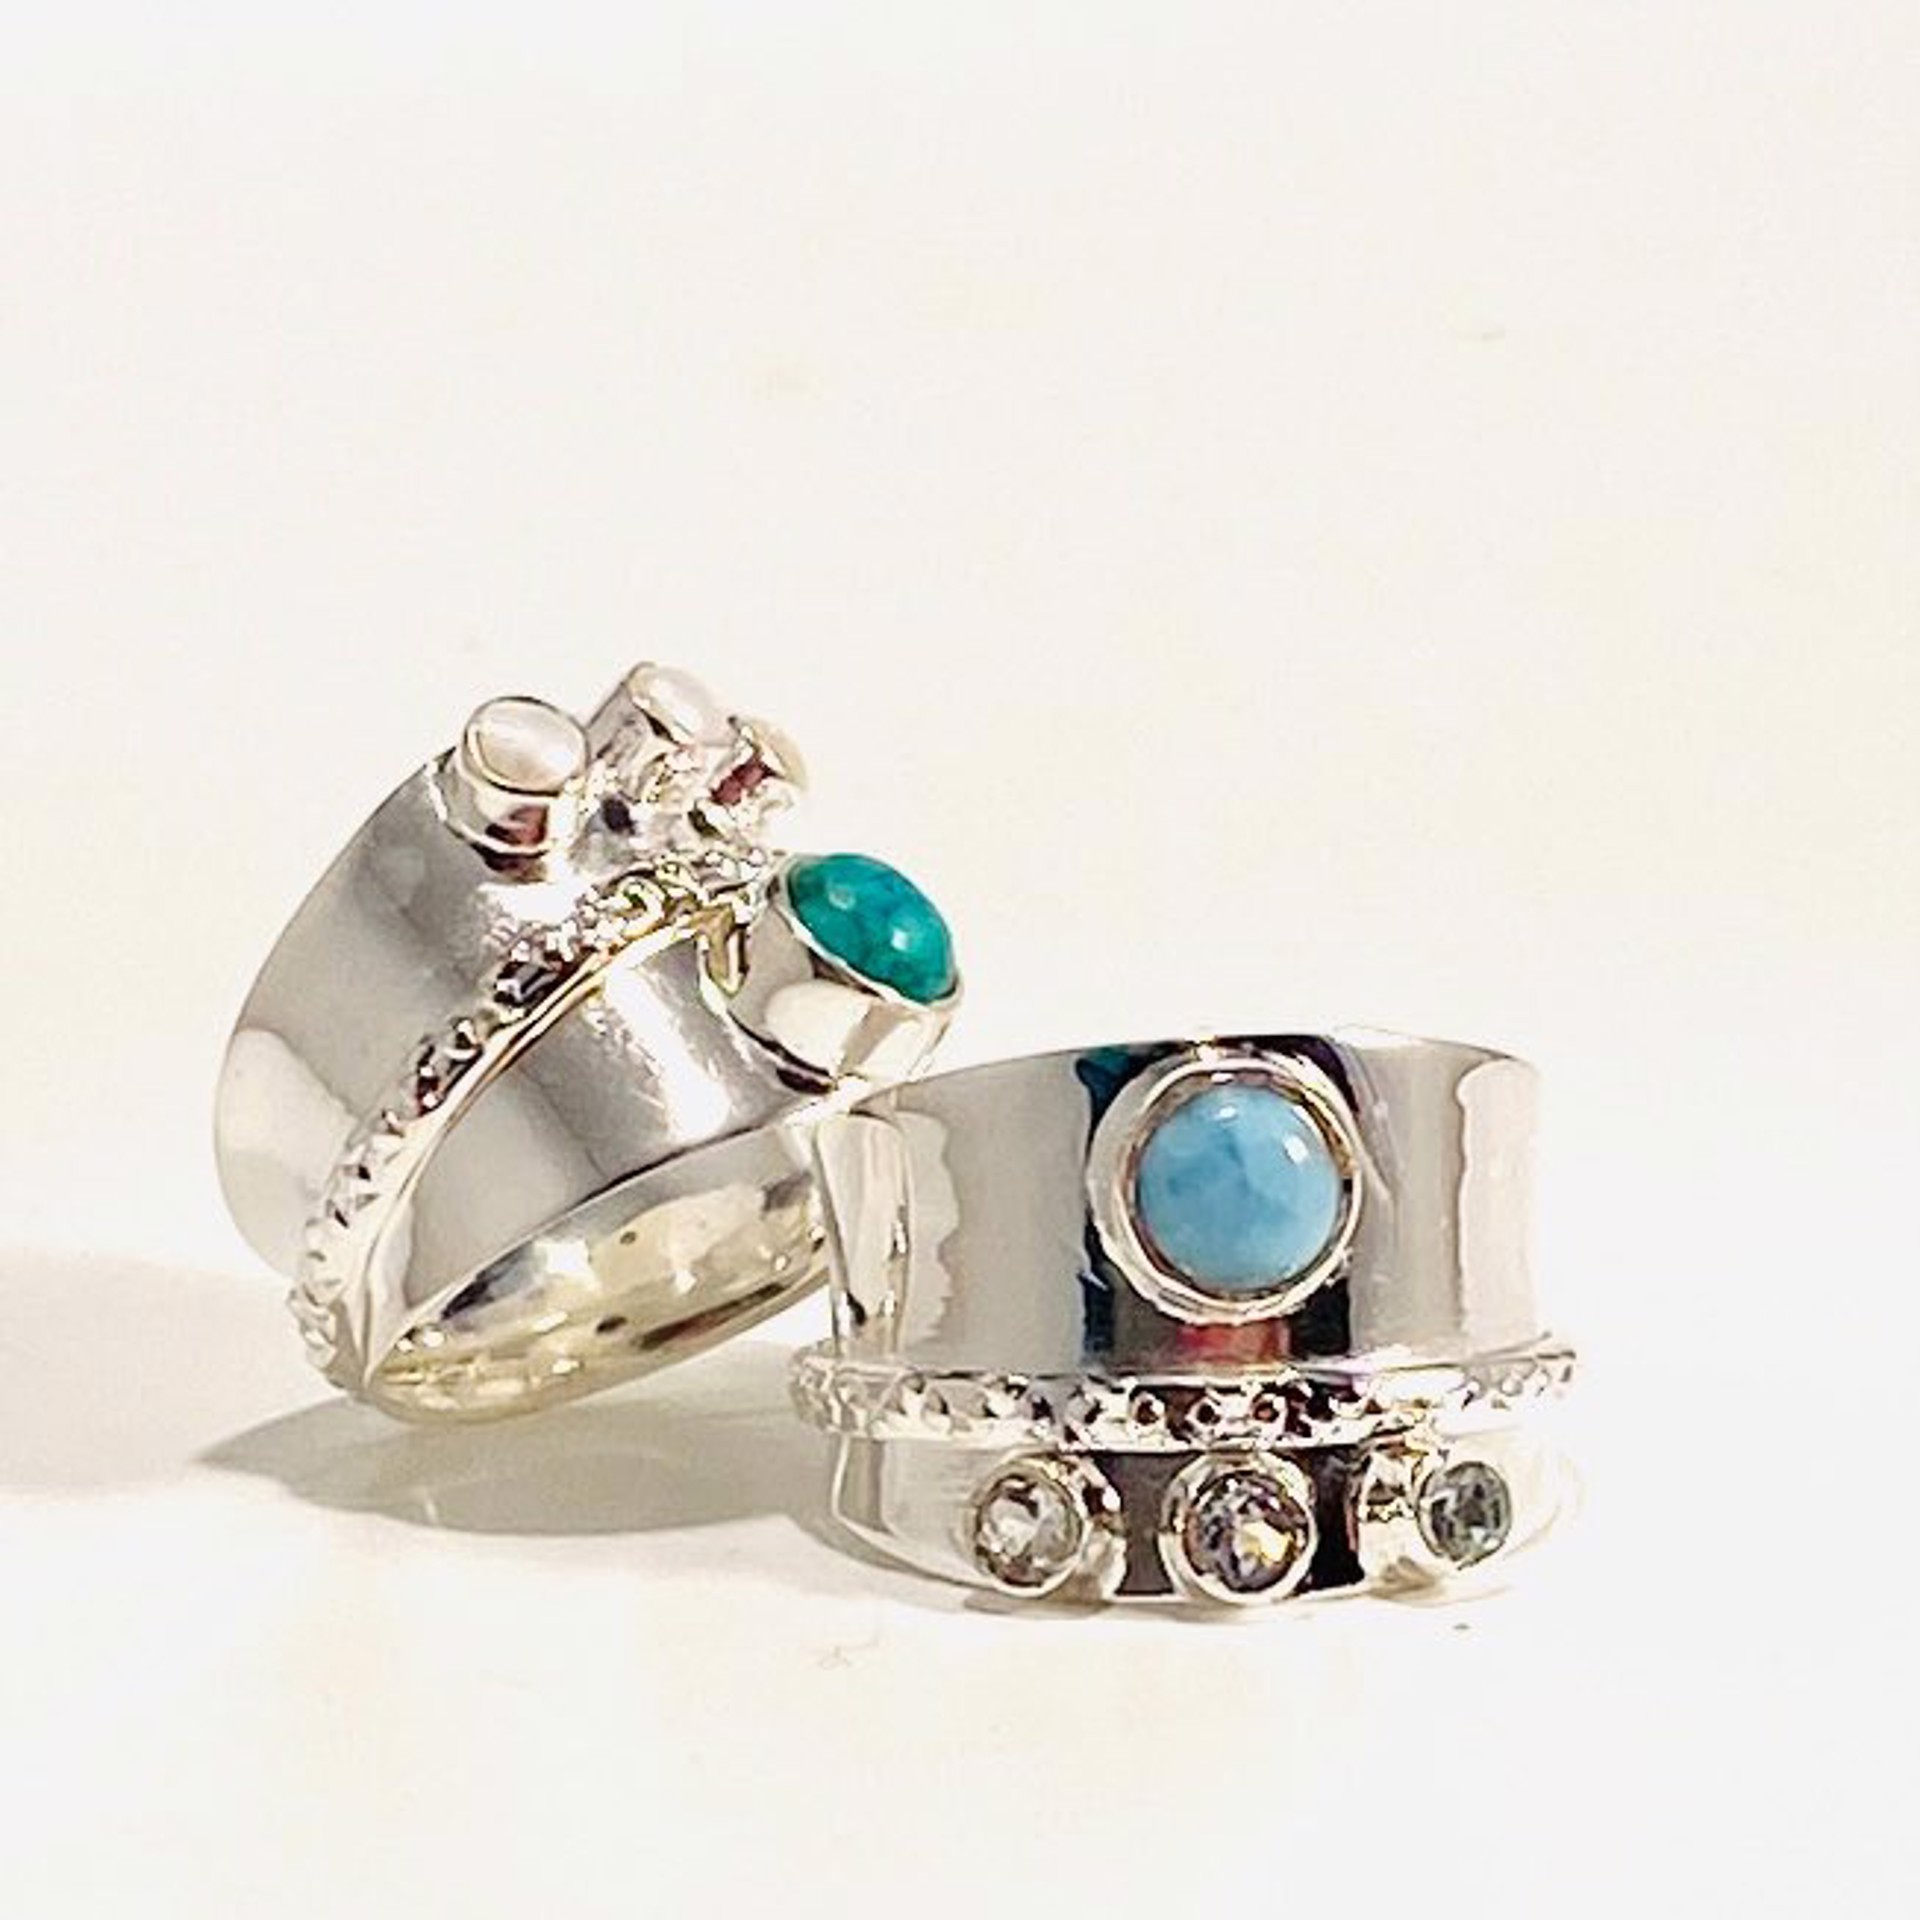 Larimar, Blue Topaz, Turquoise, Pearl Spin Ring LIMITED SIZES MONSR-3209 by Monica Mehta